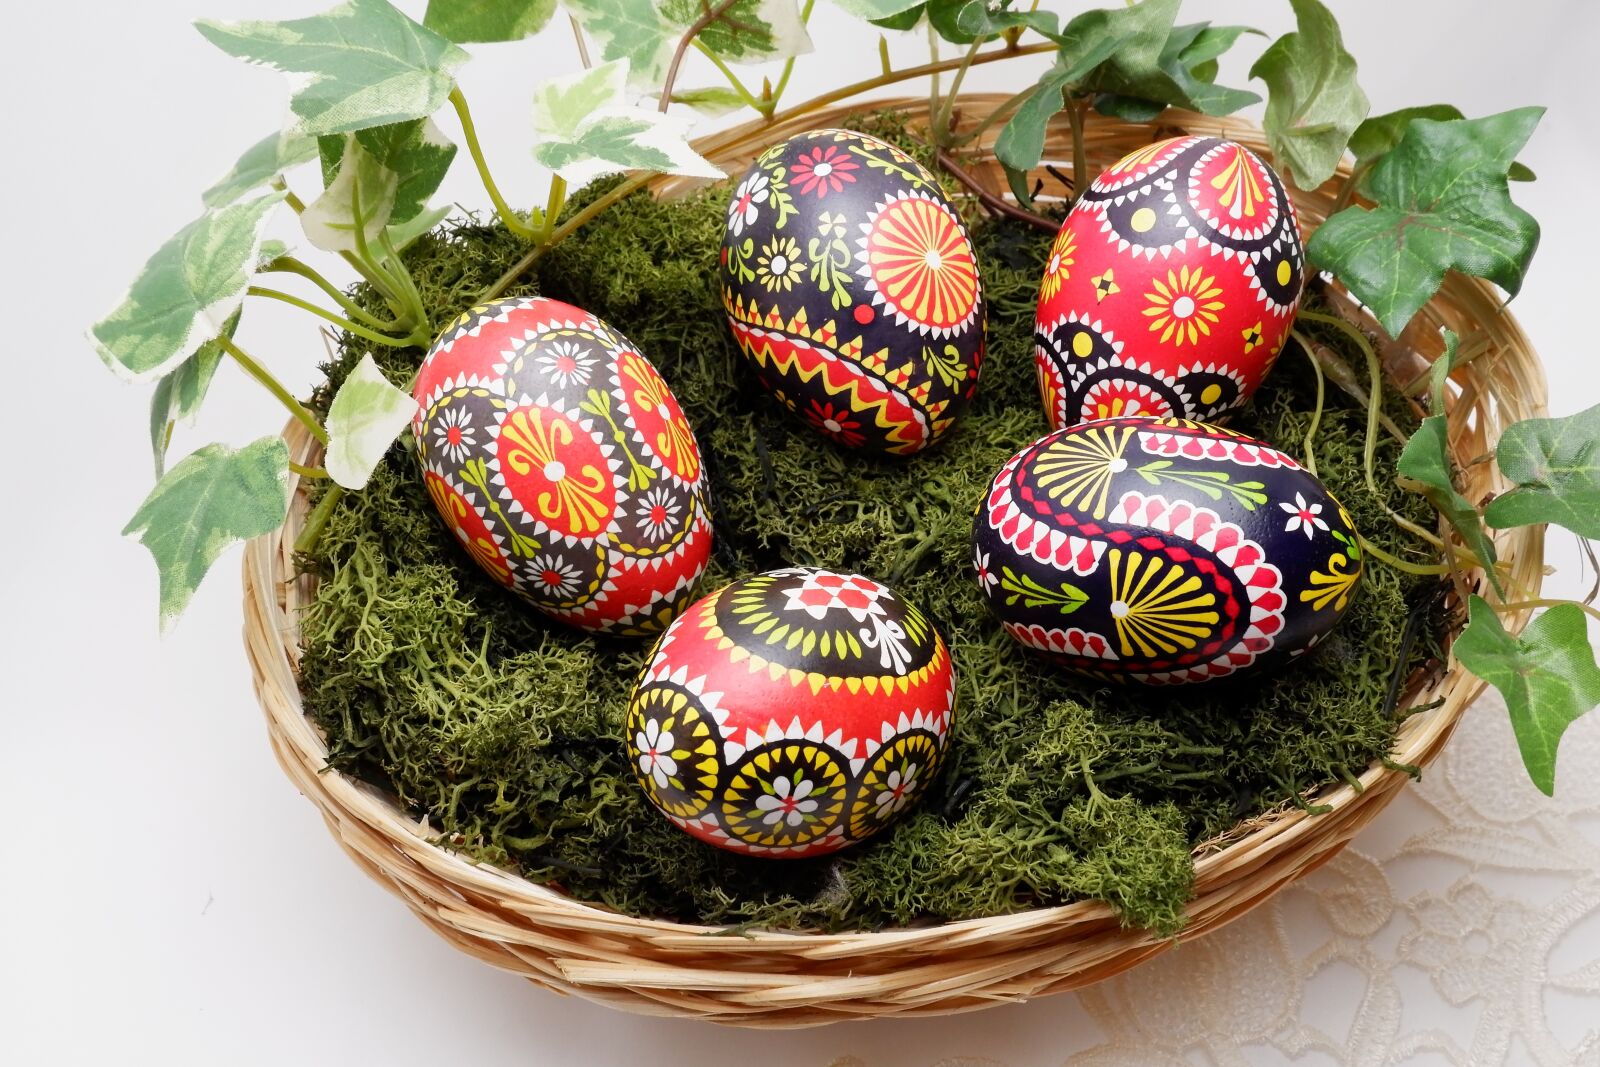 Fujifilm X-A10 sample photo. Osterkorb, easter decoration, basket photography